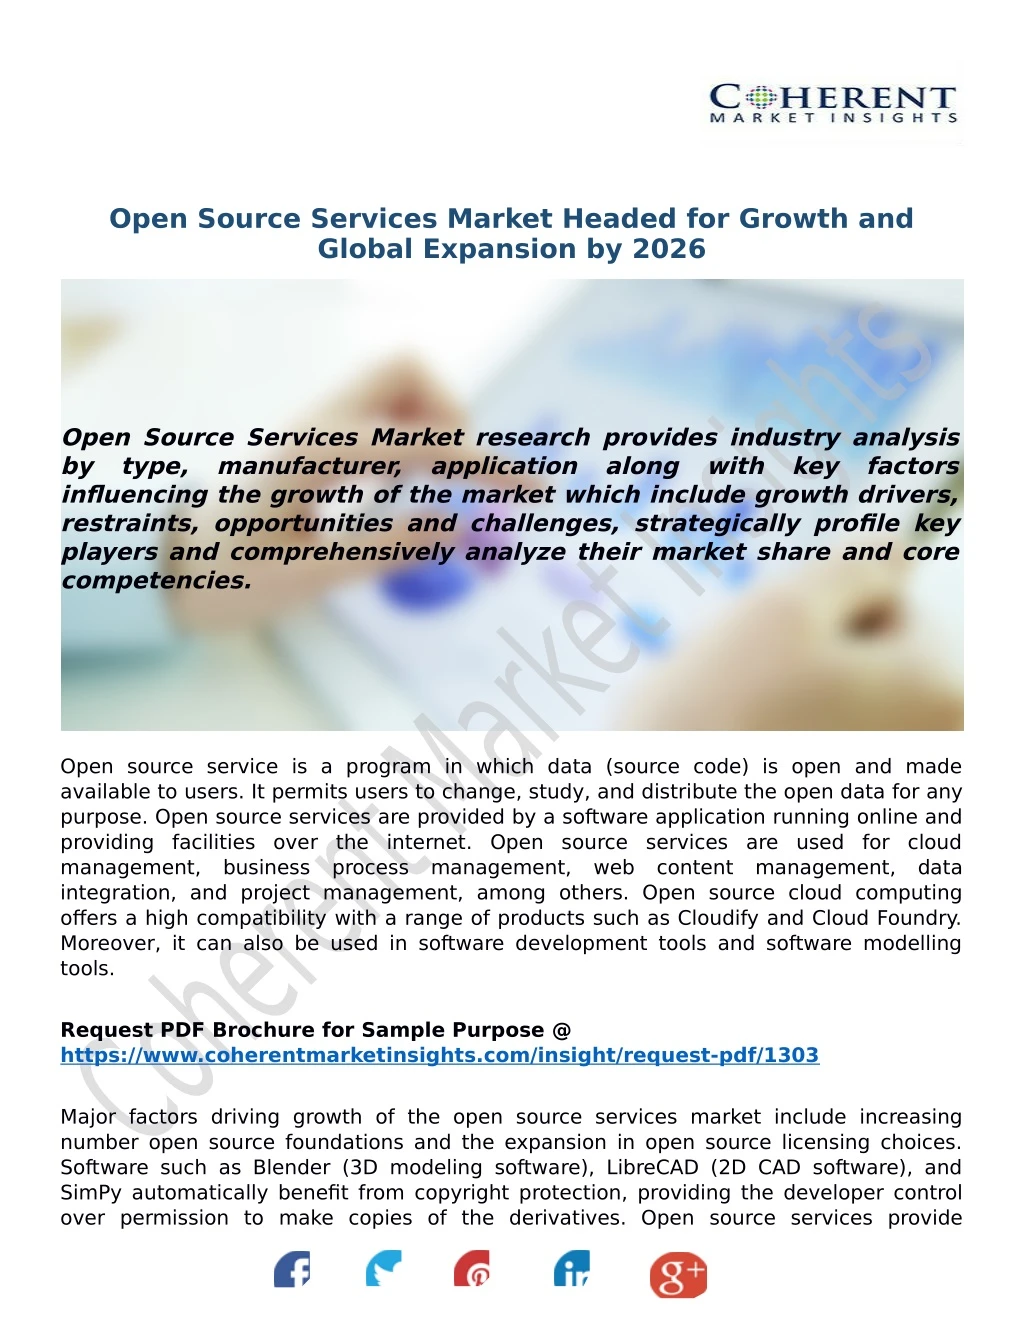 open source services market headed for growth